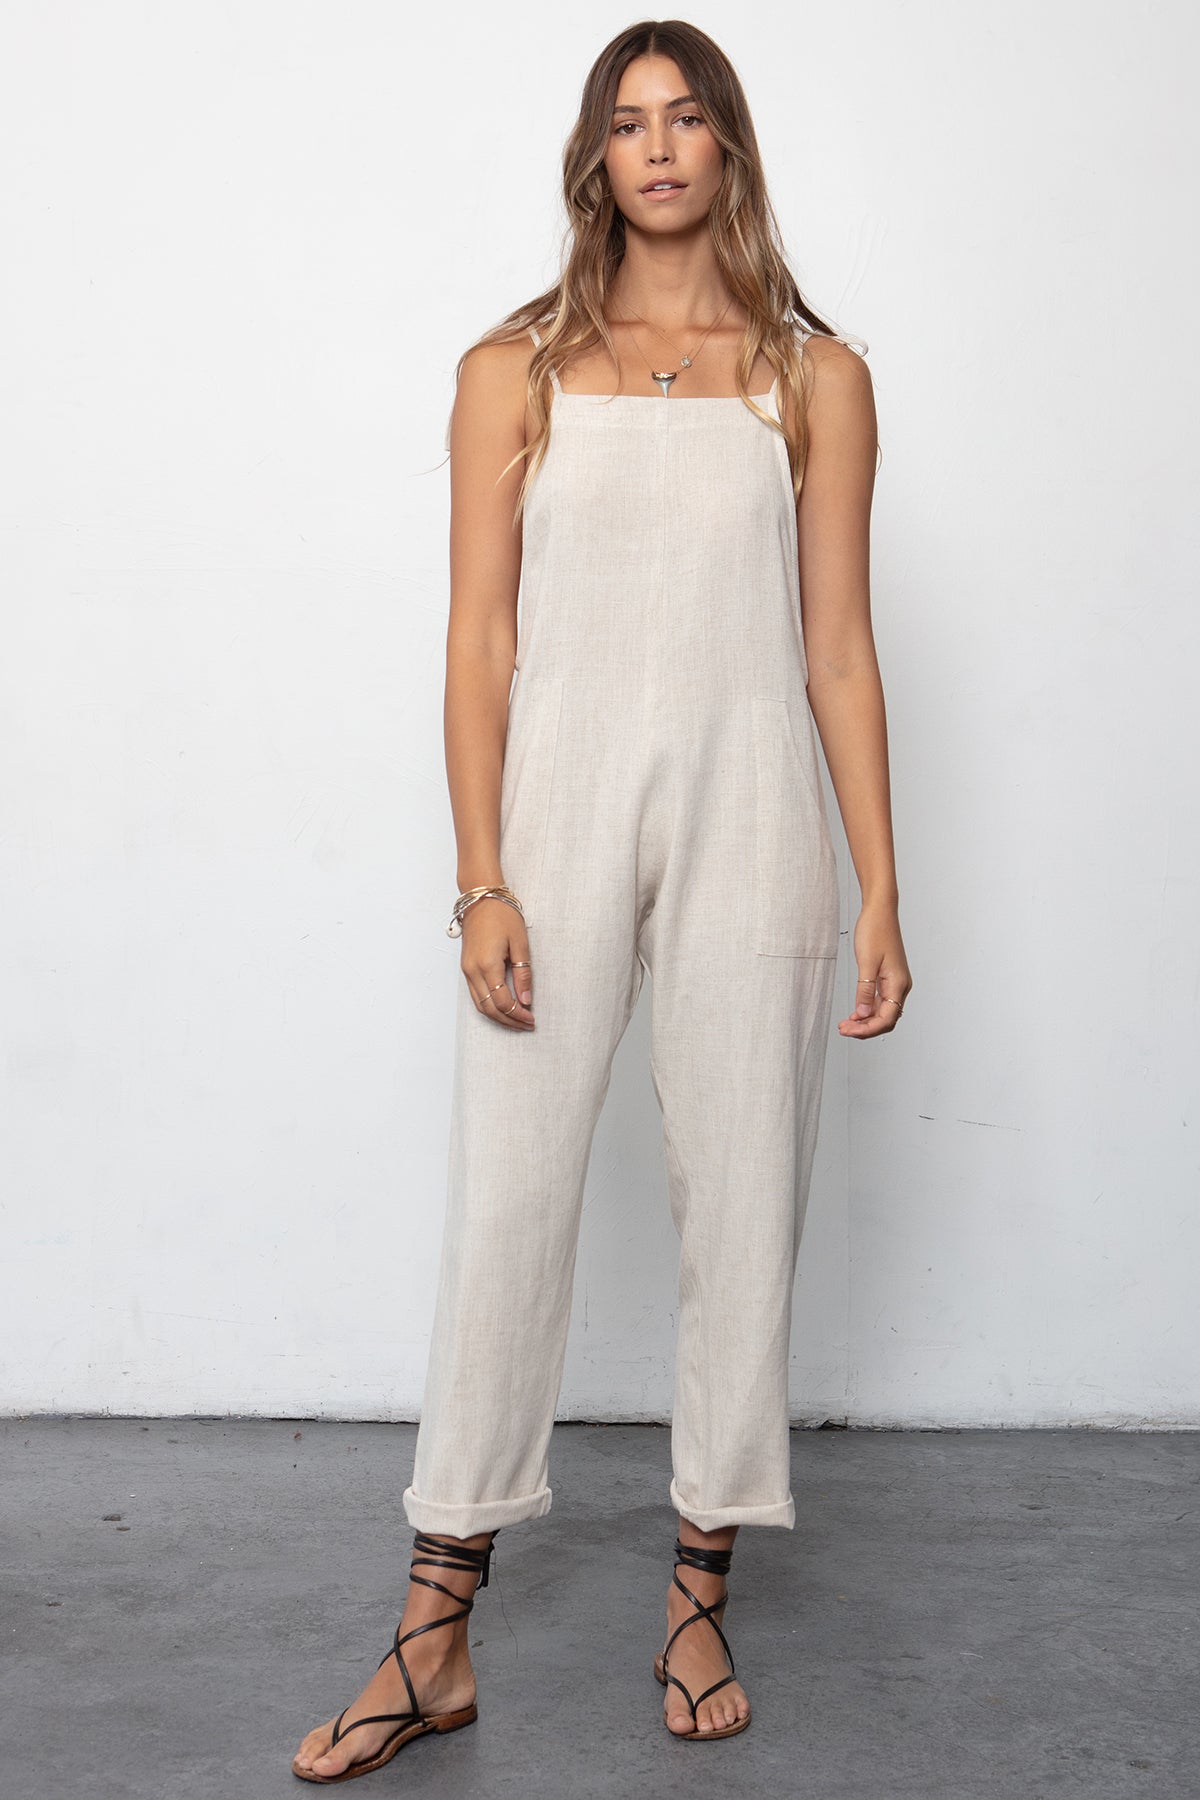 Stillwater's Some Beachy Overalls in the color Natural